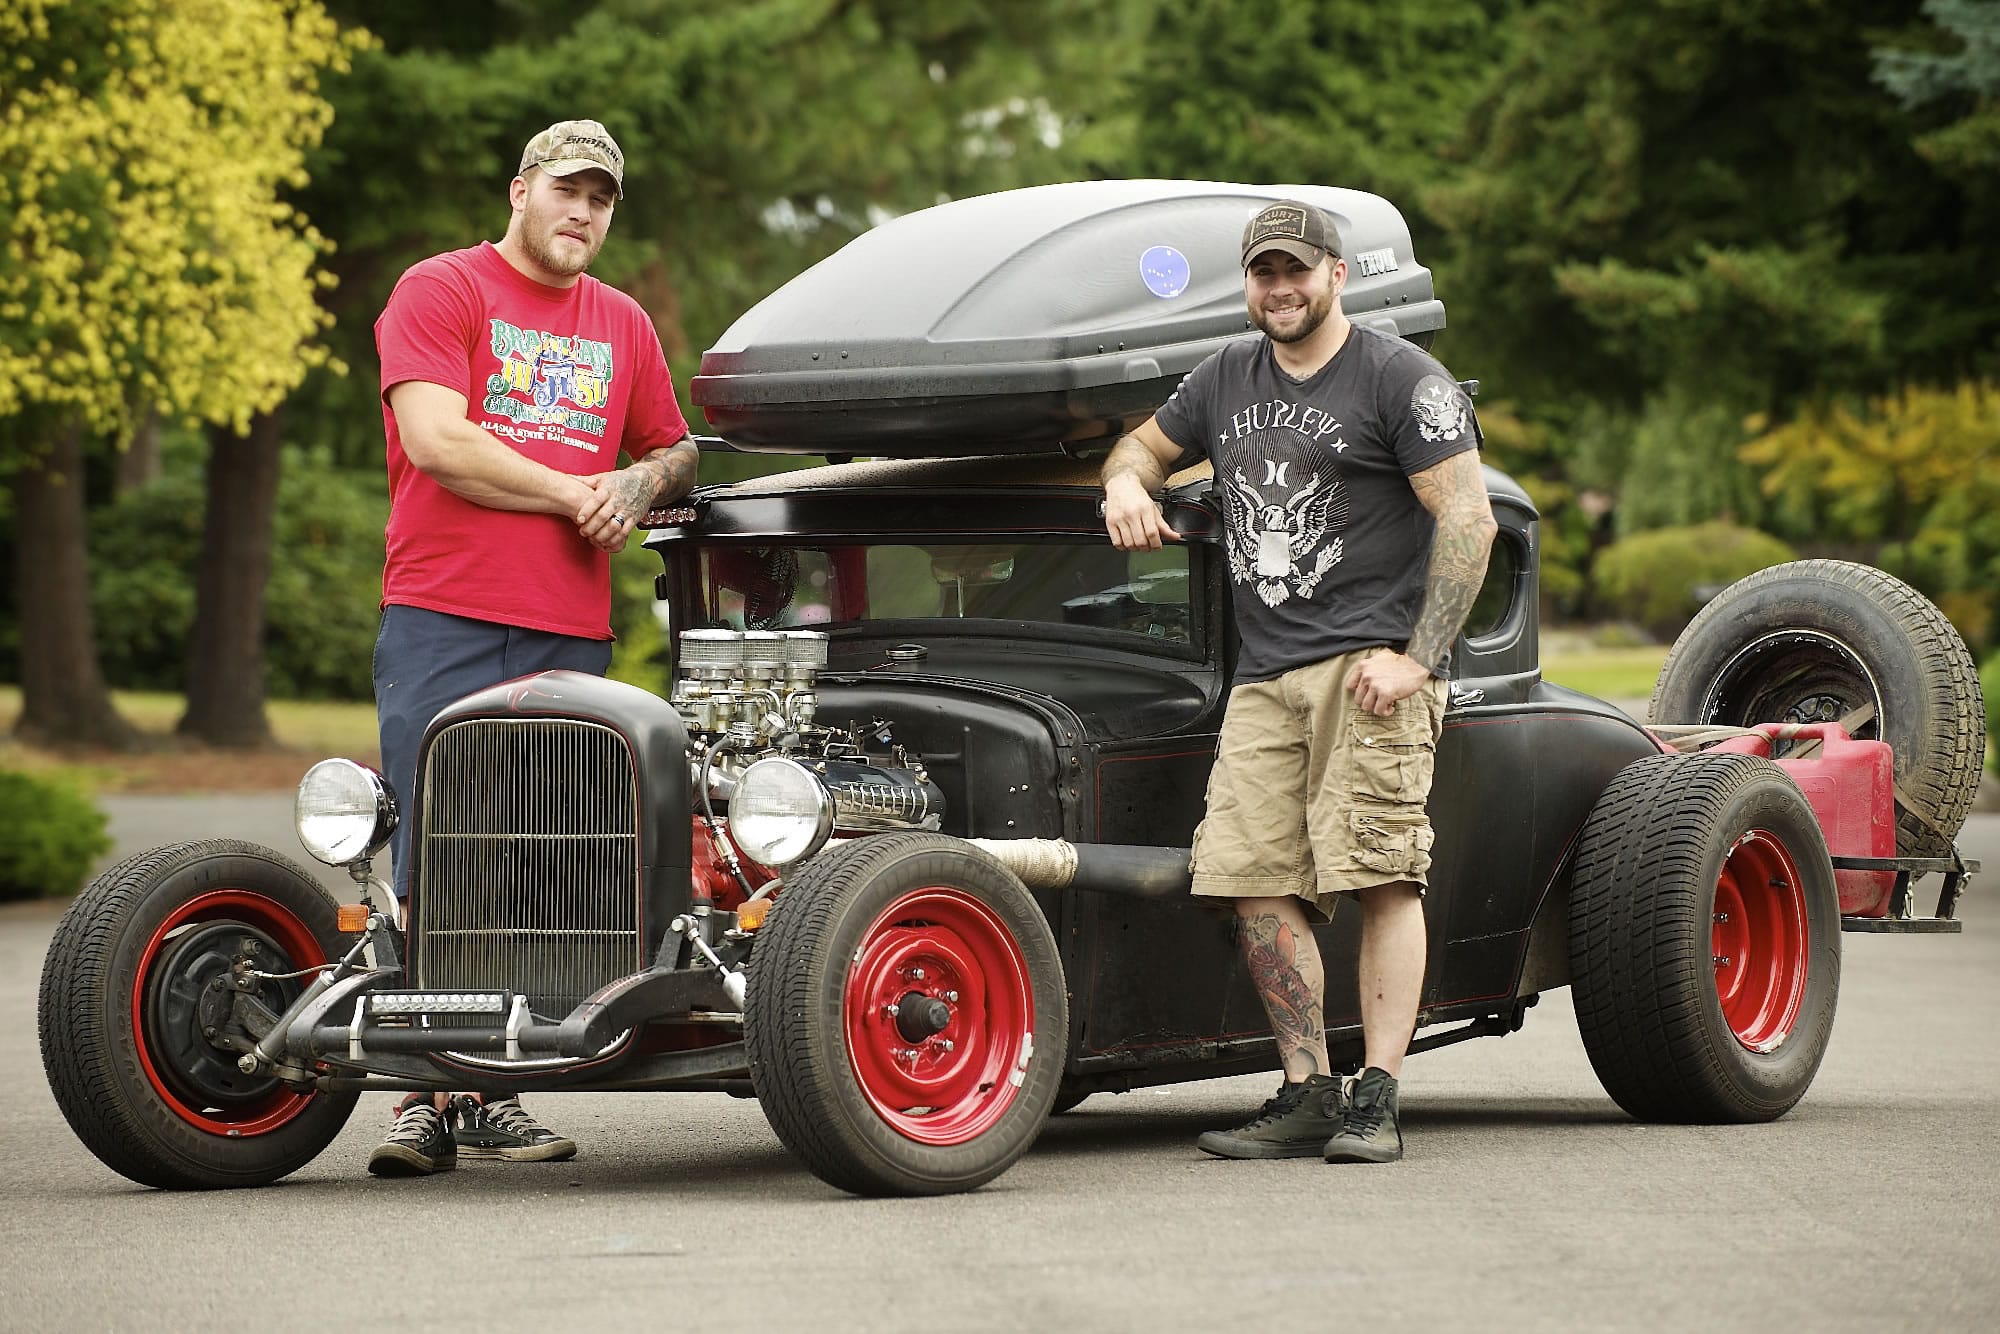 Aaron Showalter, left, and Lenny Cestaro stand next to a chopped 1935 Ford on Tuesday in Vancouver.